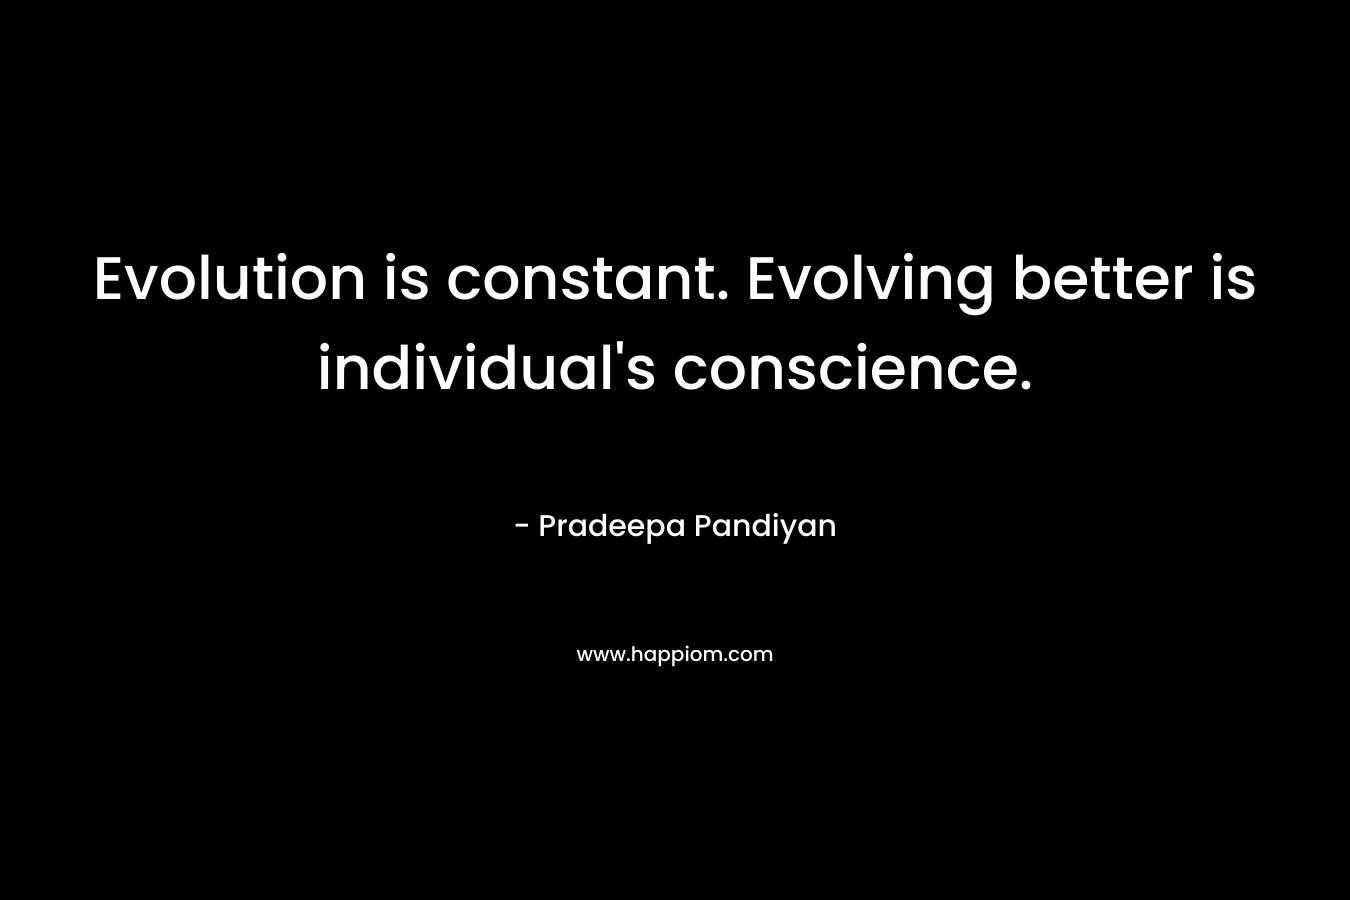 Evolution is constant. Evolving better is individual's conscience.